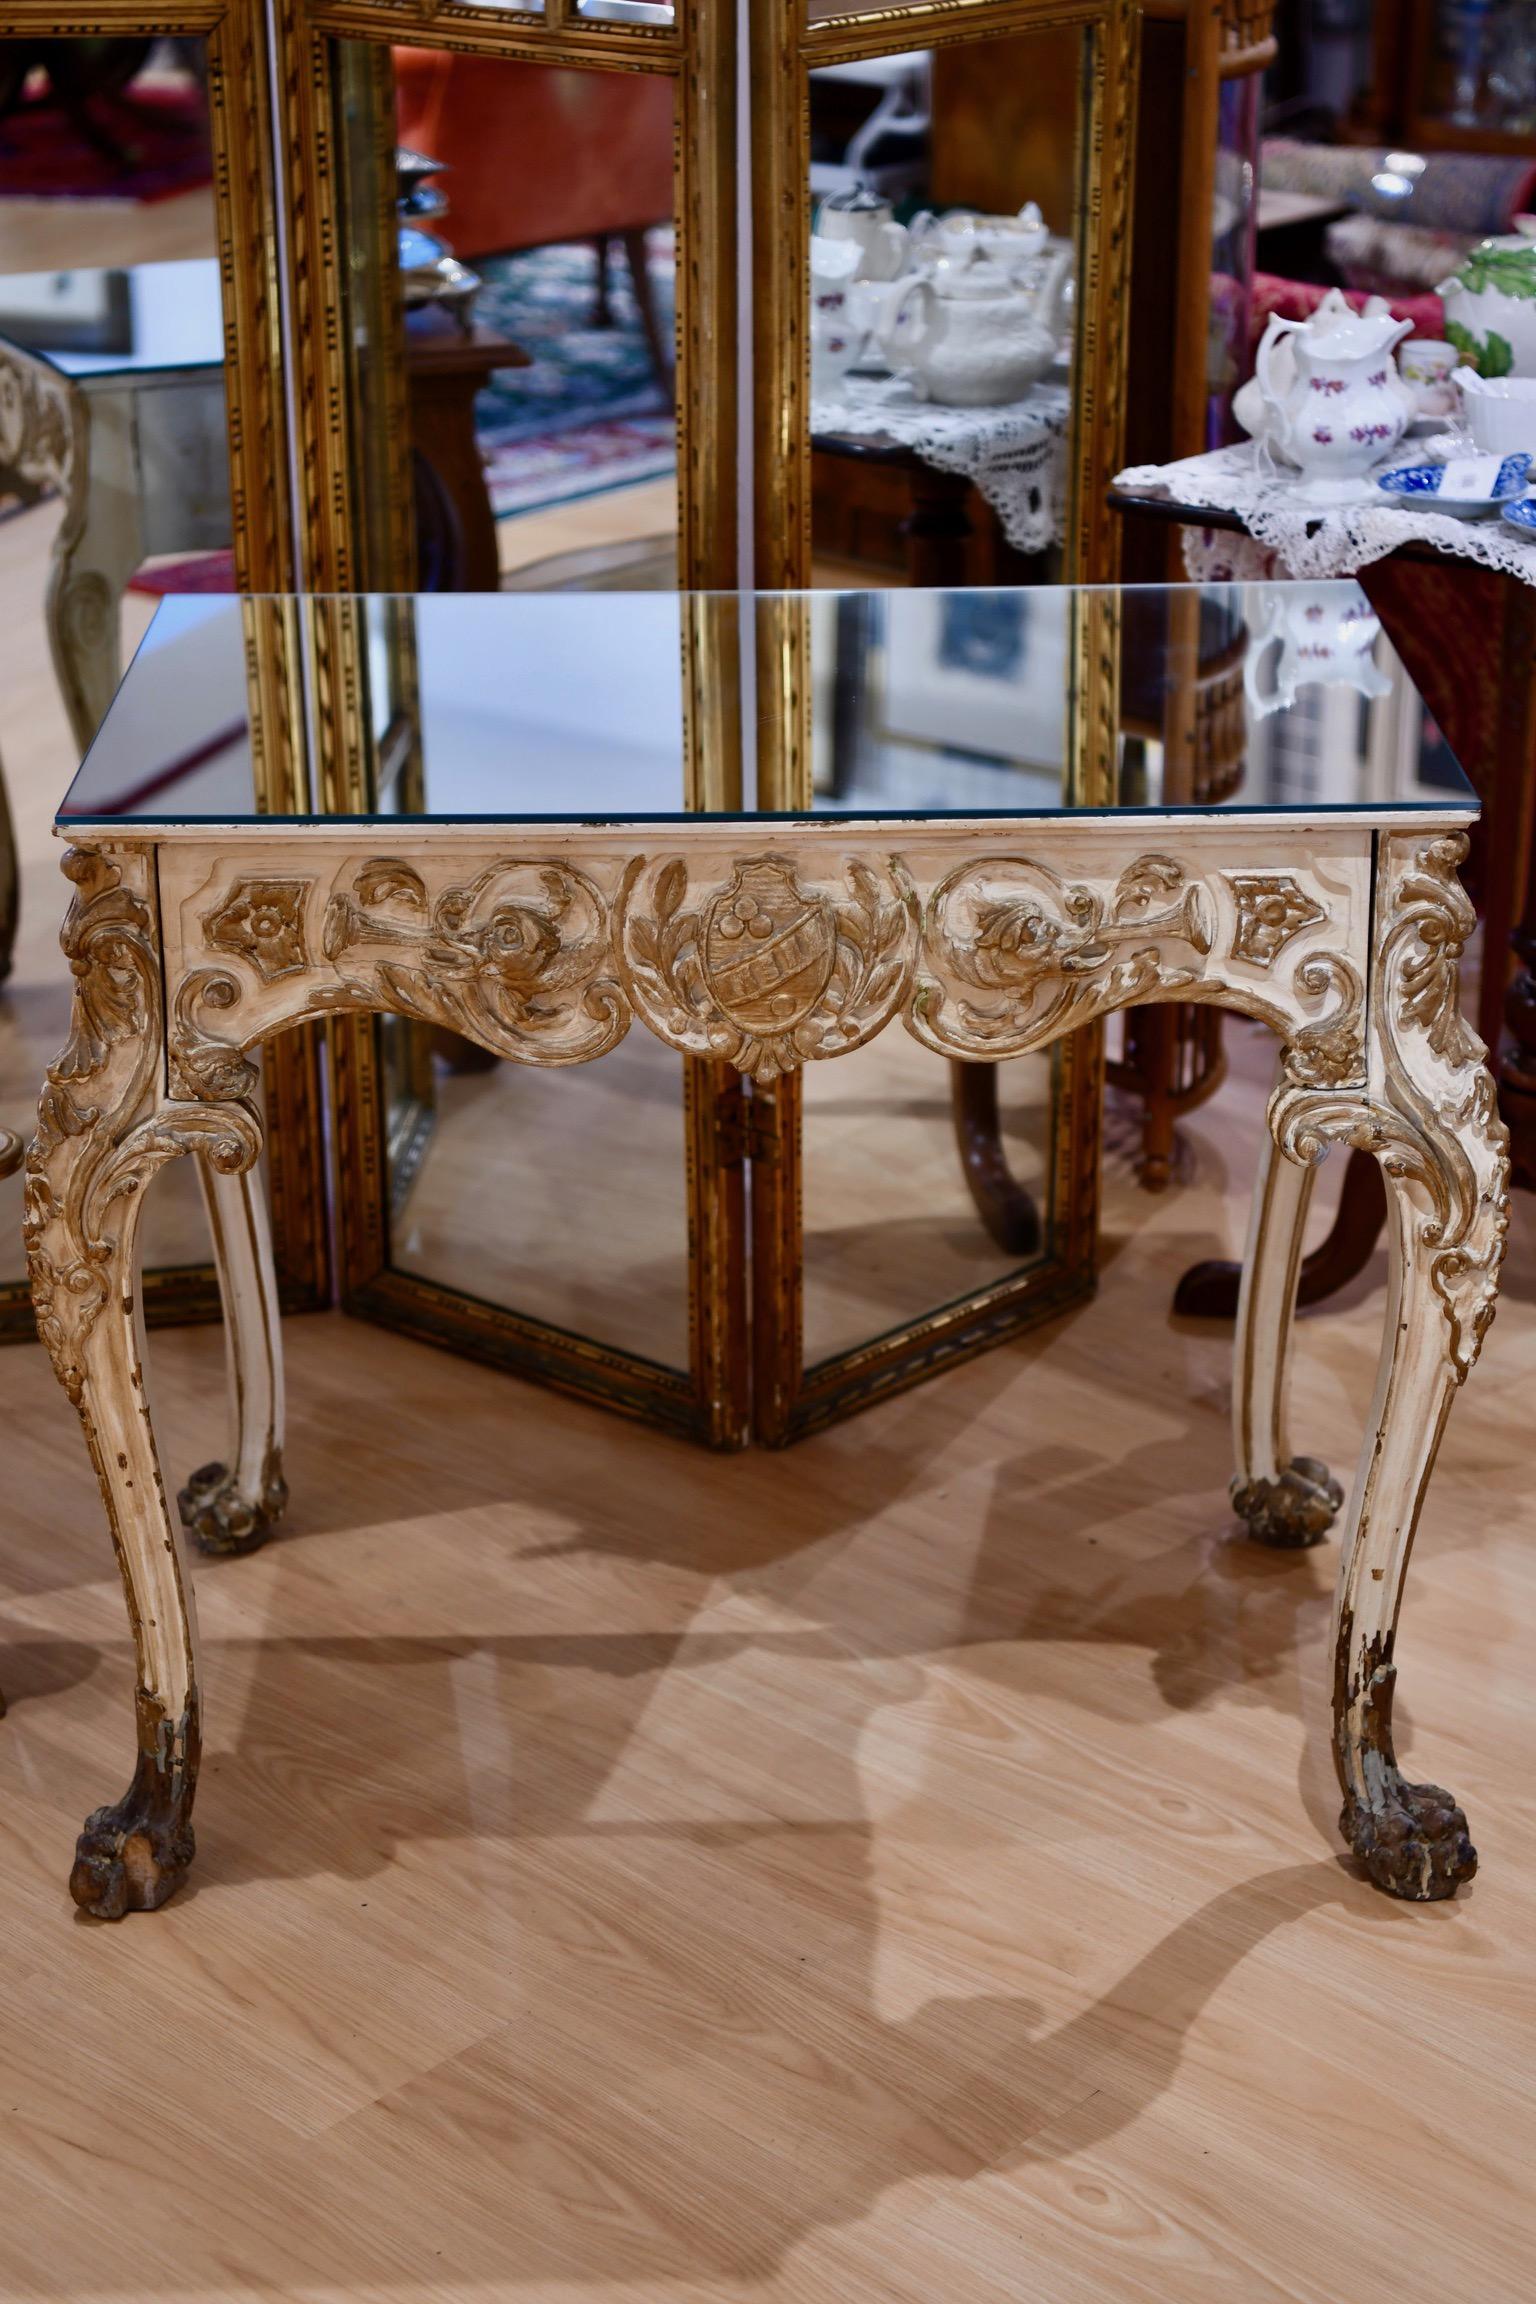 Finely carved late 19th or early 20th century Hollywood Regency white and parcel-gilt decorated vanity by Jansen, with mirrored top and a velvet-lined center drawer. Wear is consistent with age with some scratching to mirror top and gilt flaking at